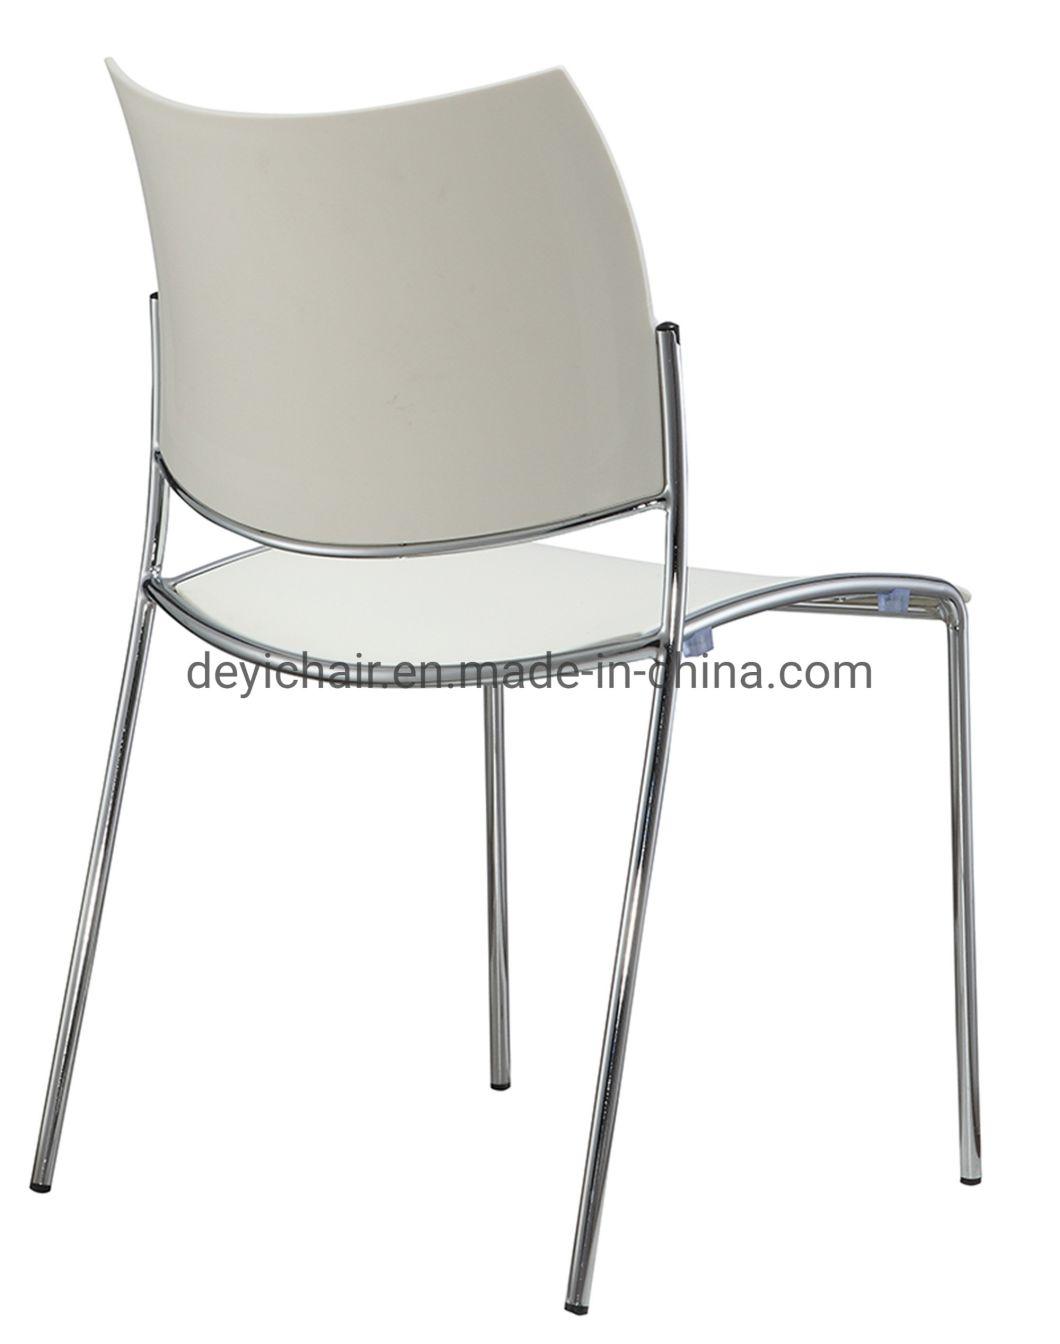 19mm Tube 1.5mm Thickness Four Legs Chrome Frame White Plastic Back and Seat Stackable Conference Chair